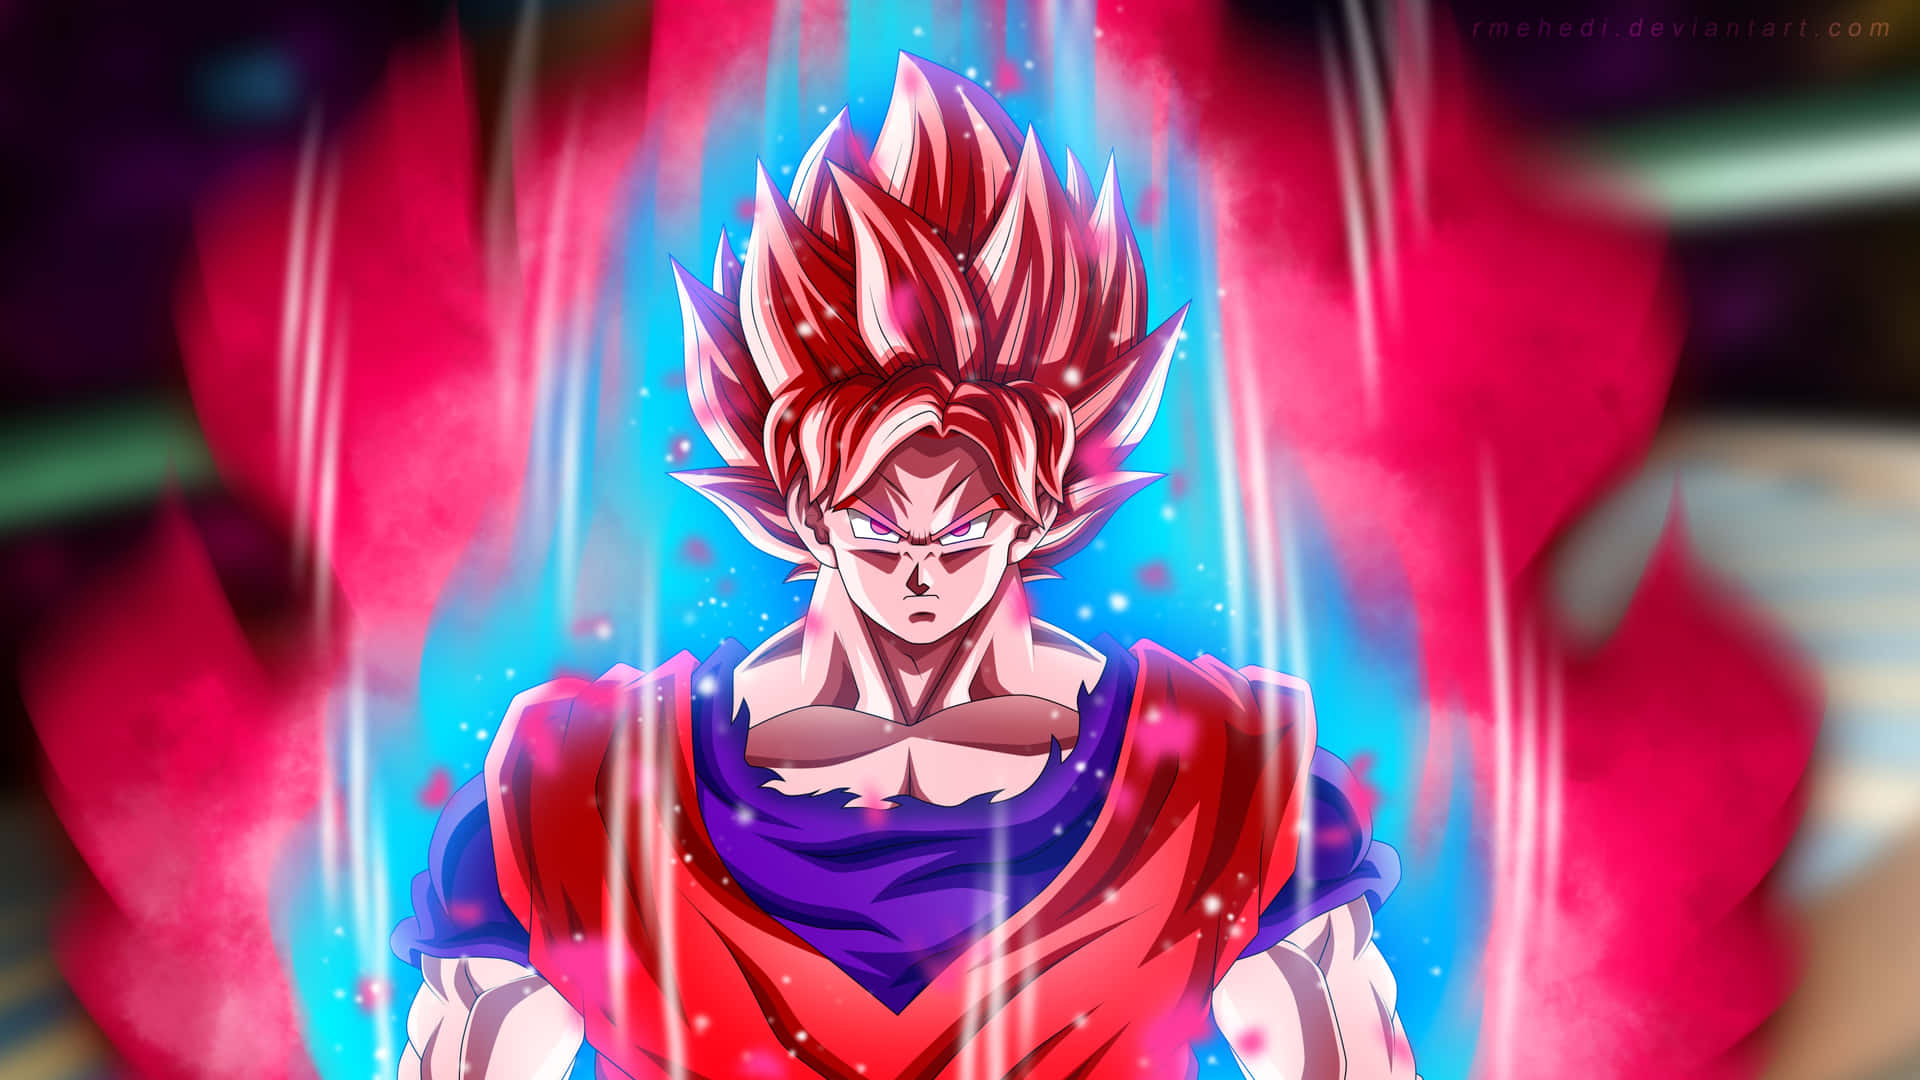 Goku powers up to Super Saiyan level in the amazing visuals of Dragon Ball Z 4K PC Wallpaper